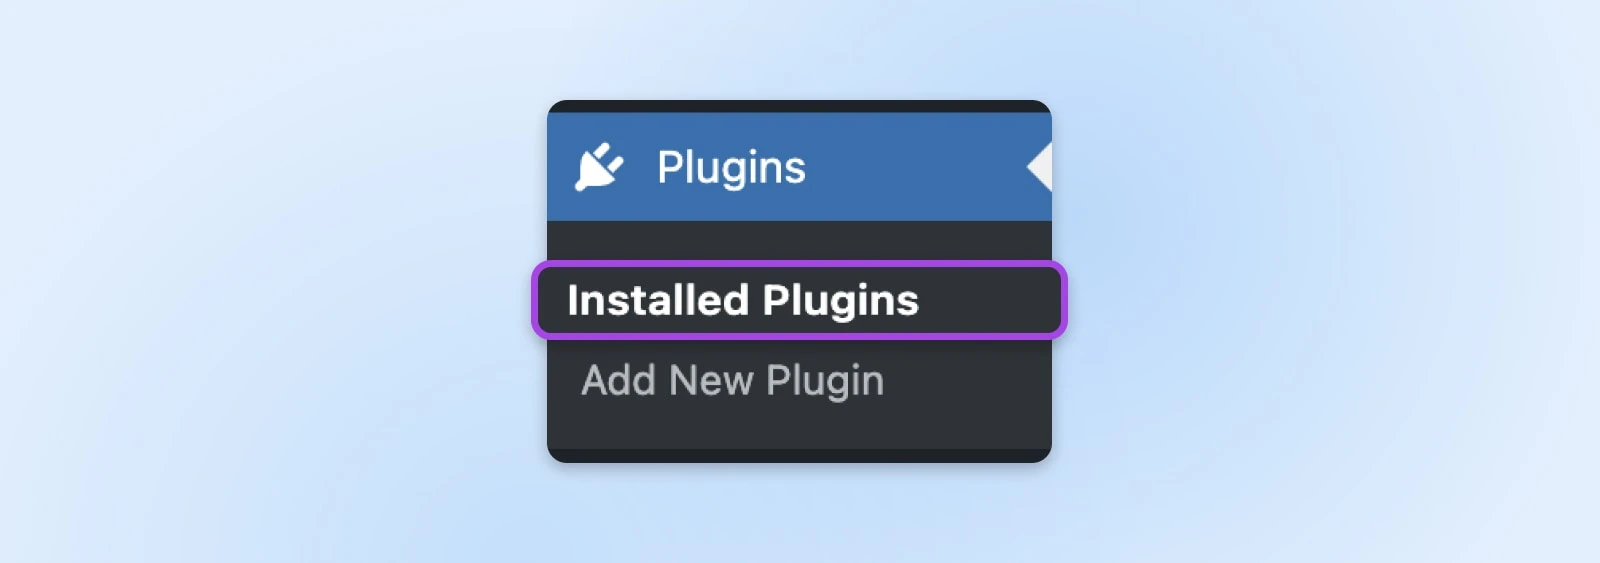 Plugins menu with "Installed Plugins" section and "Add New Plugin" button from WordPress dashboard.